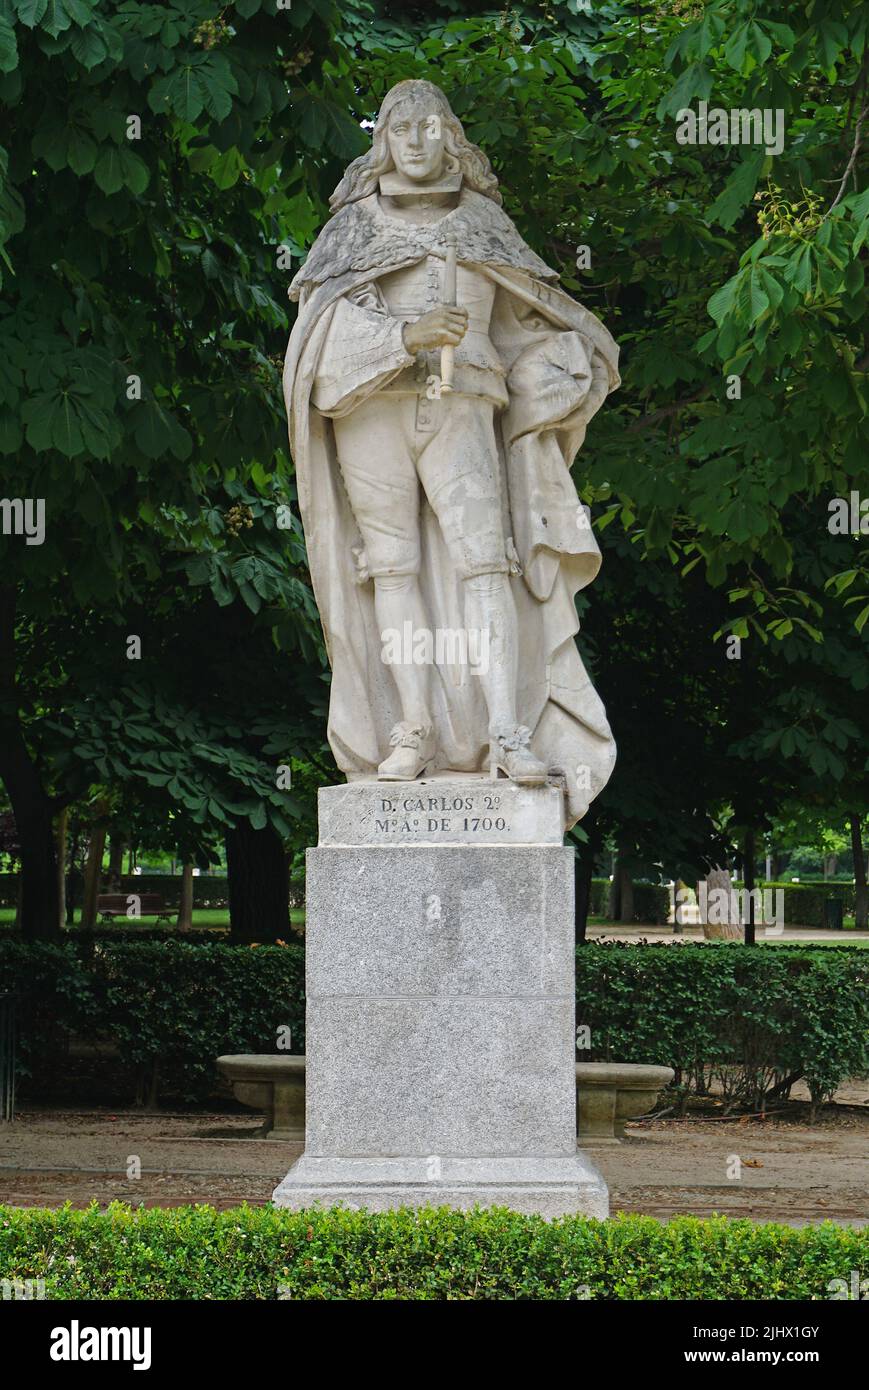 Statue of Charles II of Spain ( Carlos II ).Located at The Buen Retiro Park,Parque del Buen Retiro in Madrid, Spain.El Retiro  first belonged to the Spanish Monarchy.Late 19th century it became a public park. Stock Photo